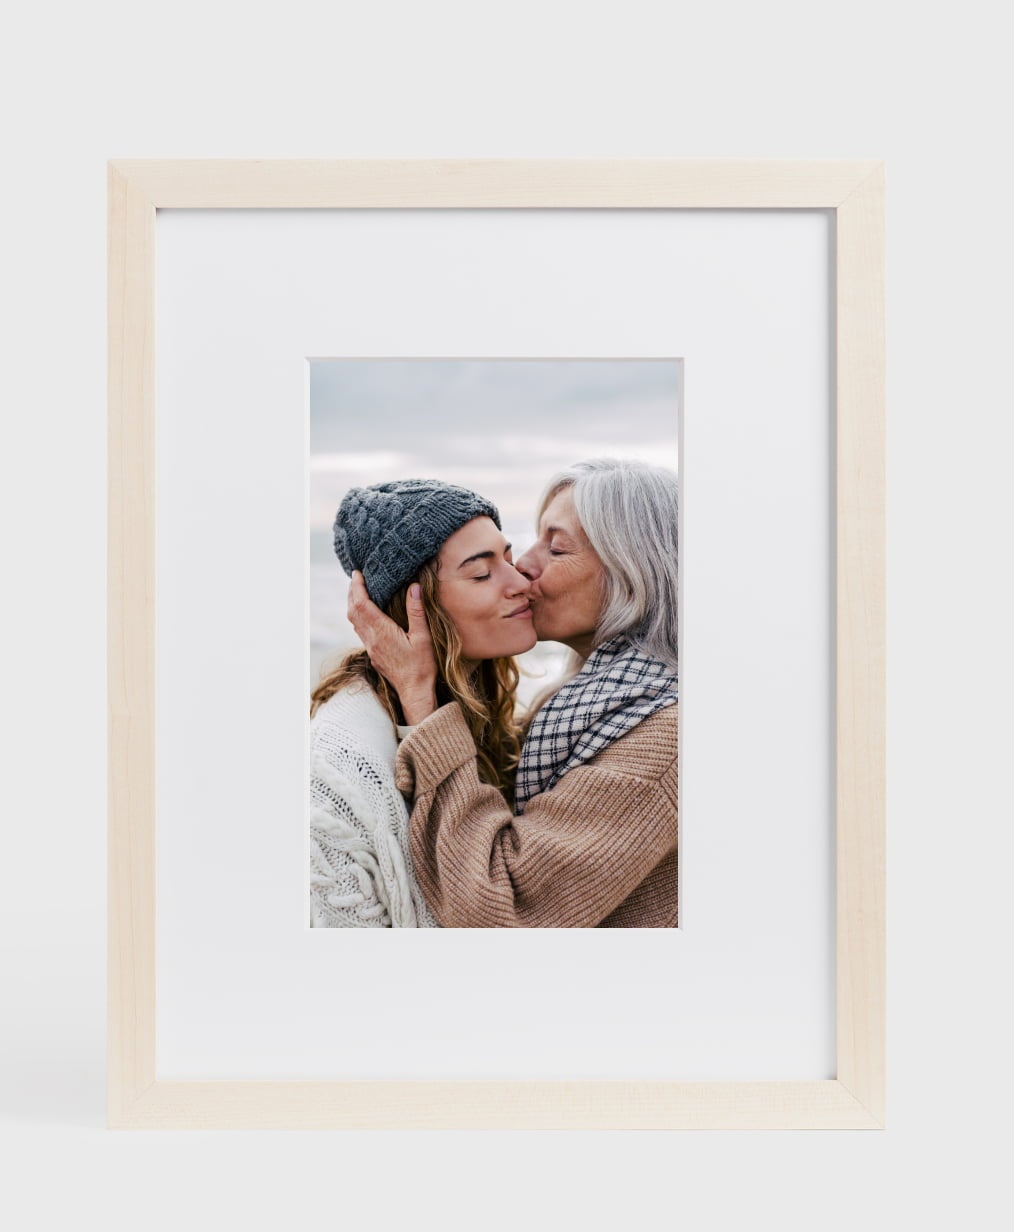 One maple finish gallery frame showing a picture of an older mom kissing her adult daughter on the cheek